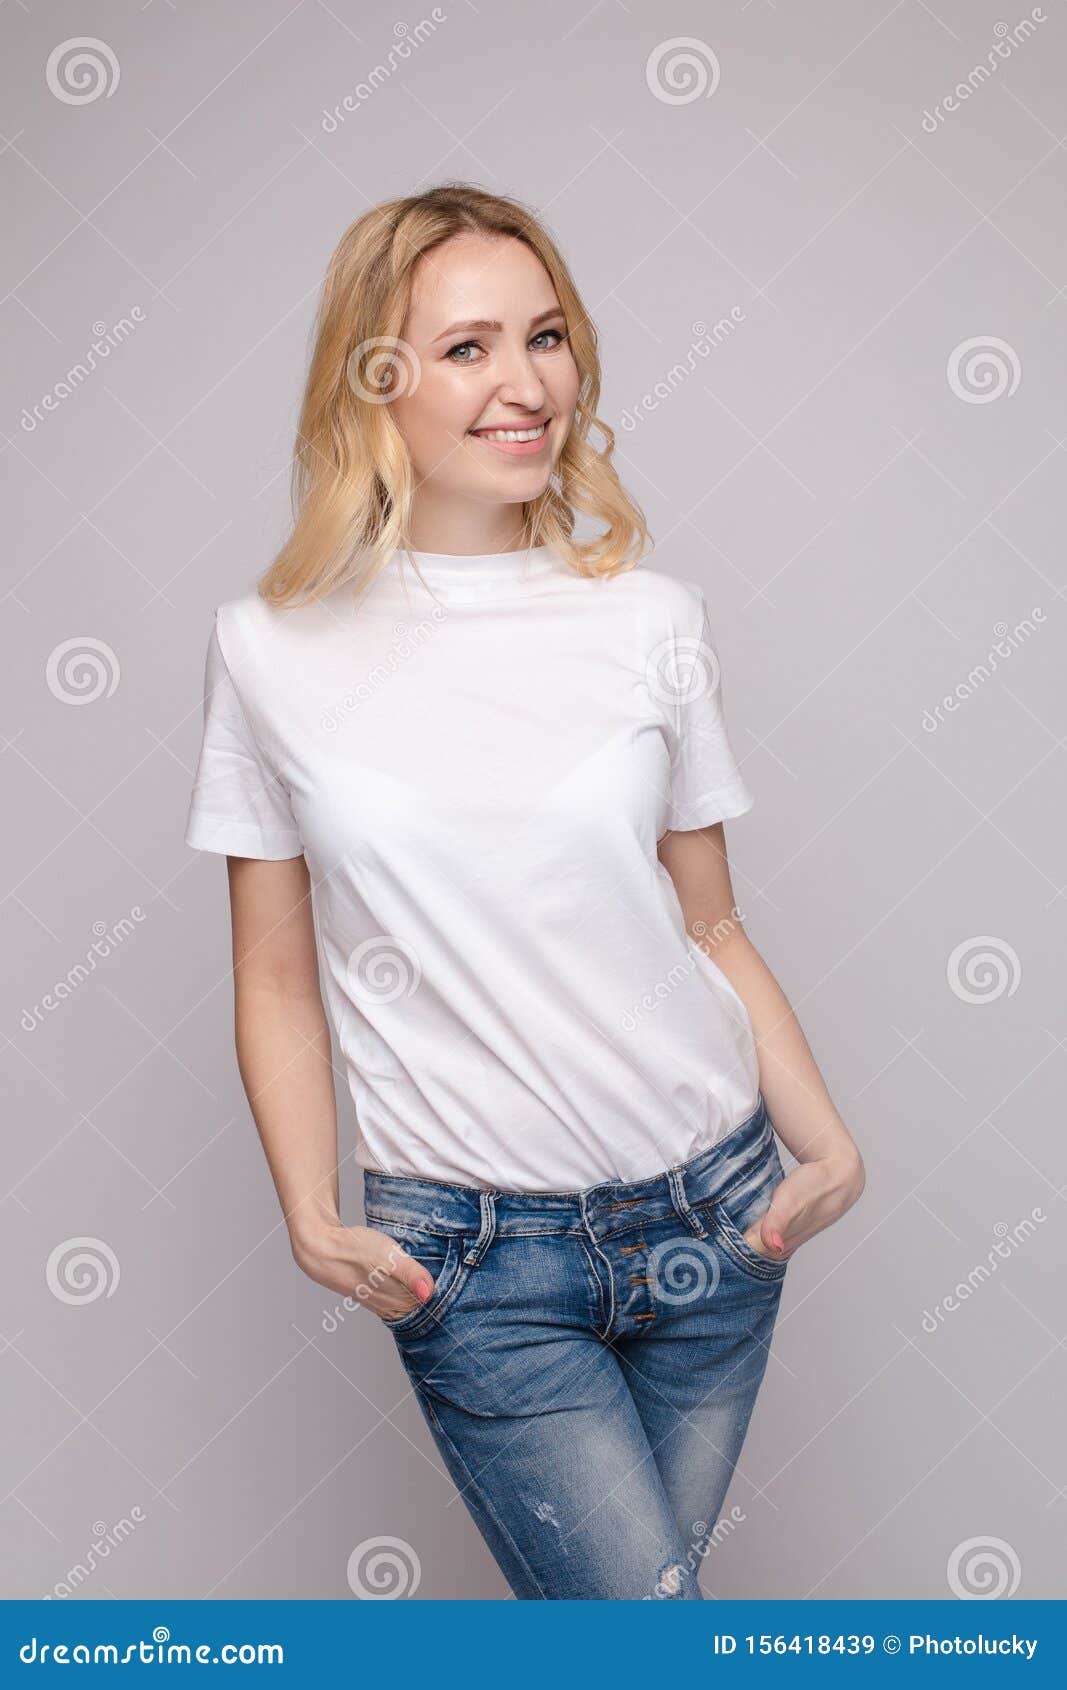 Slim Woman Wearing White Shirt and Jeans Standing Steady Stock Image ...